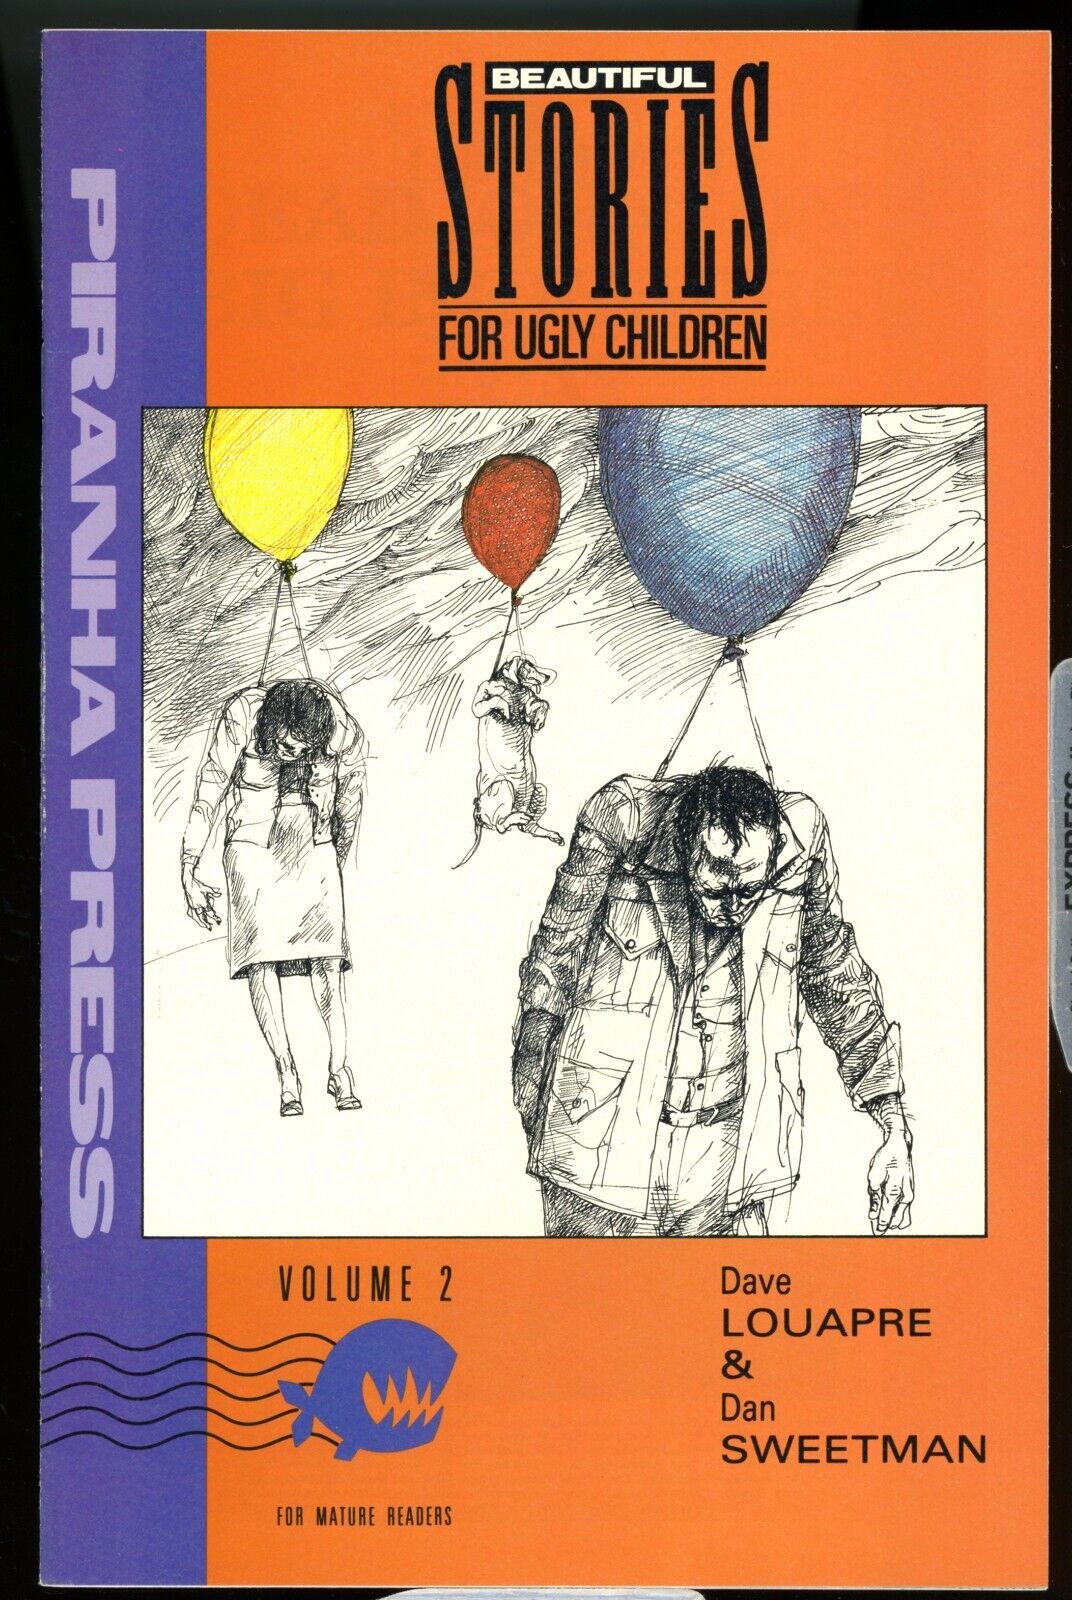 Beautiful Stories for Ugly Children Vol 1 PICK ISSUE #3 thru #8 (1989) VF/NM